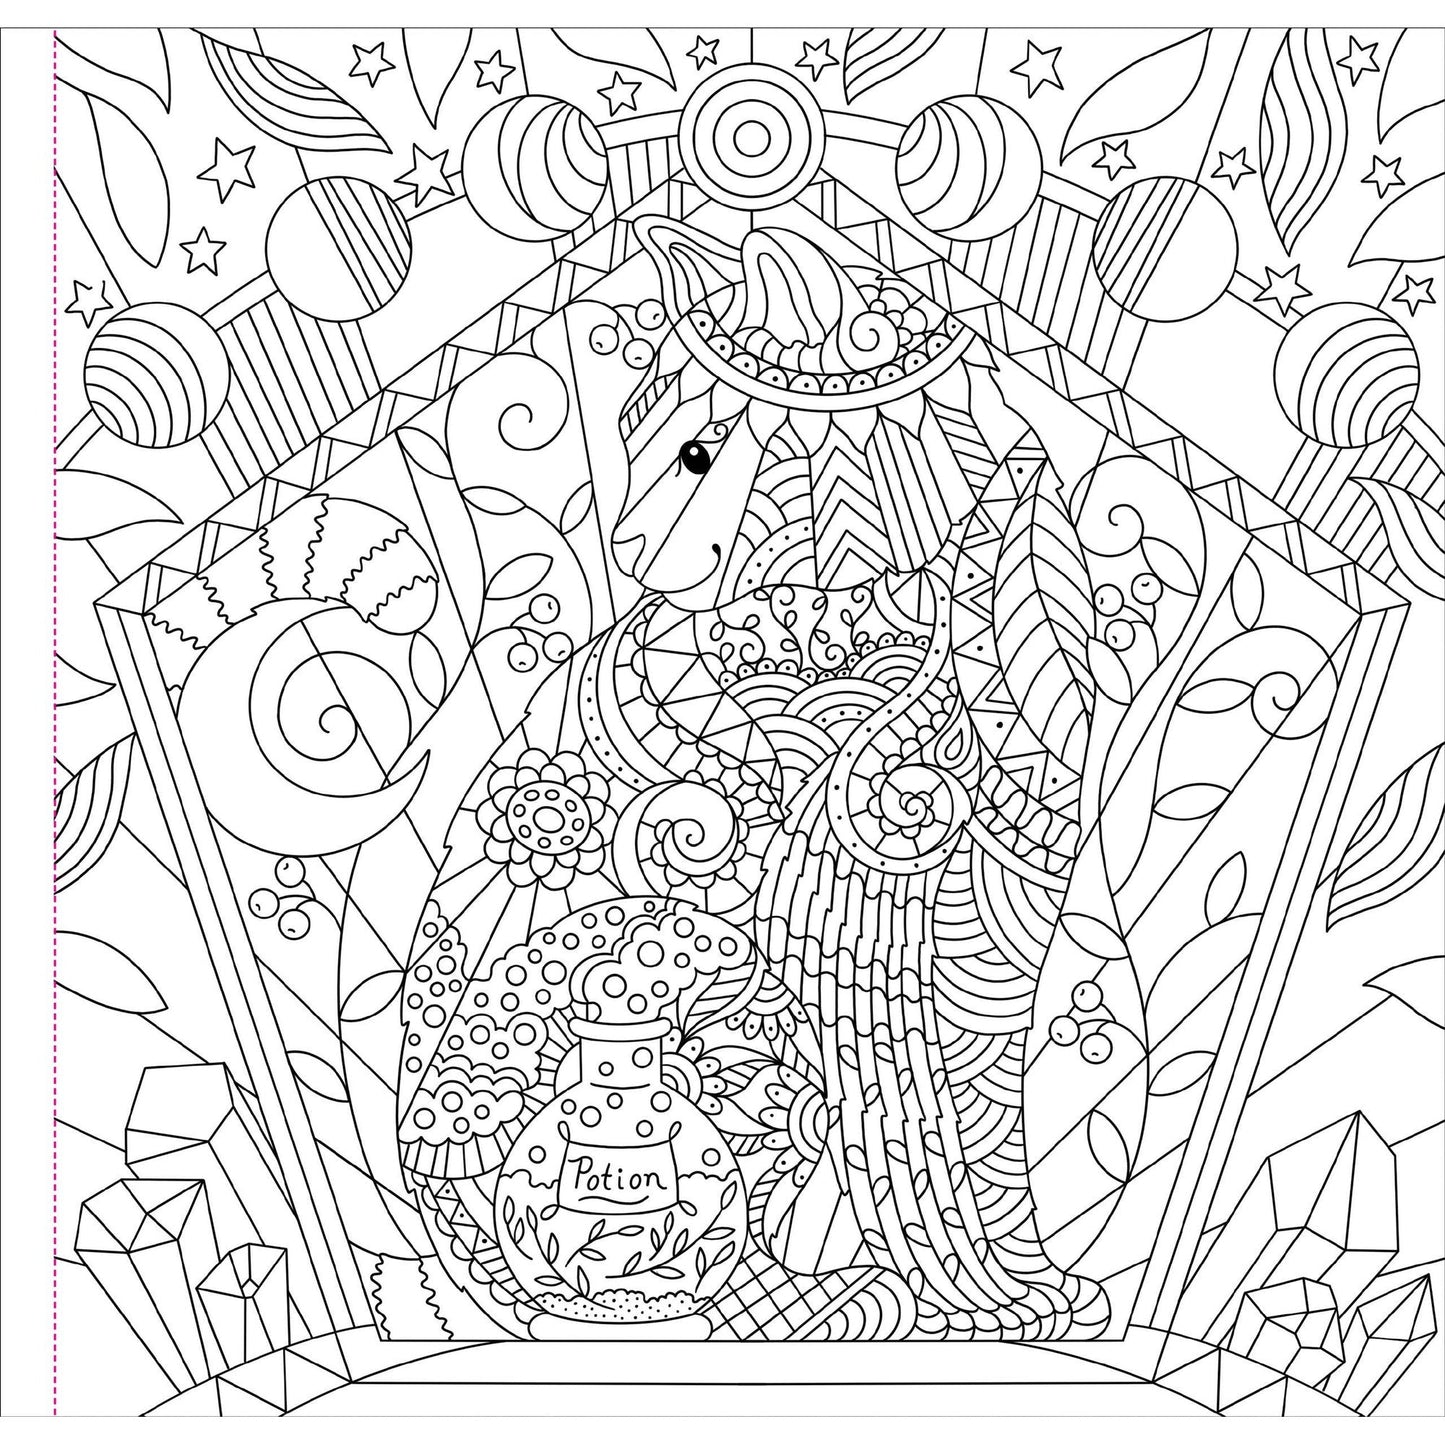 Witchcraft & Wonder Coloring Book | 31 Enchanting Mystical Illustrations Art Book